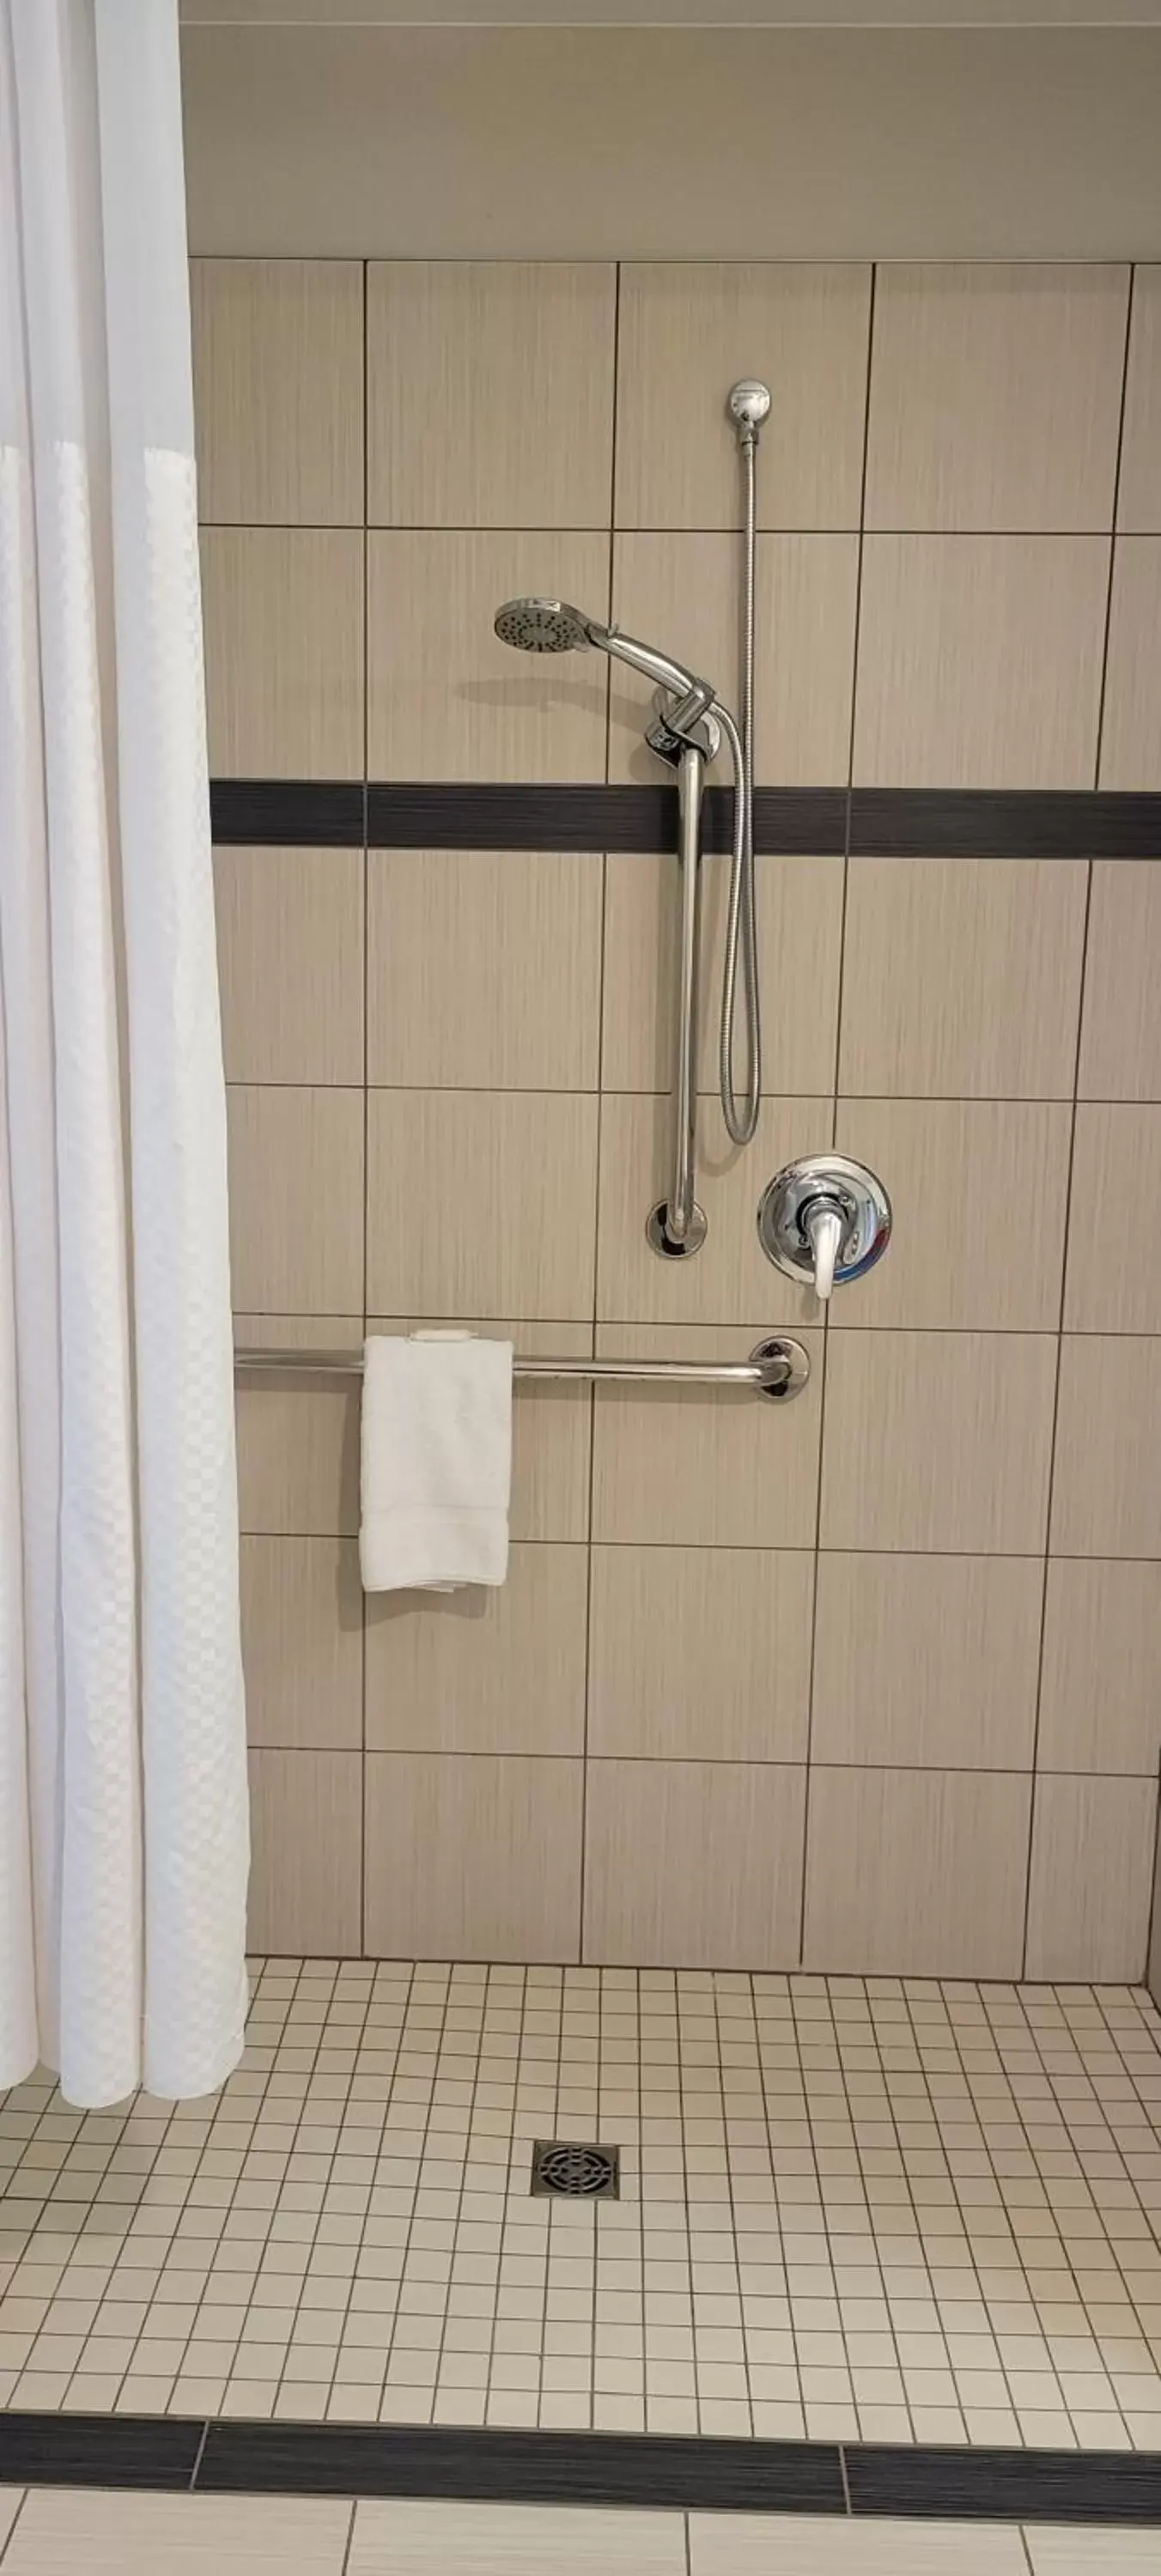 Shower, Bathroom in Microtel Inn & Suites by Wyndham Fountain North